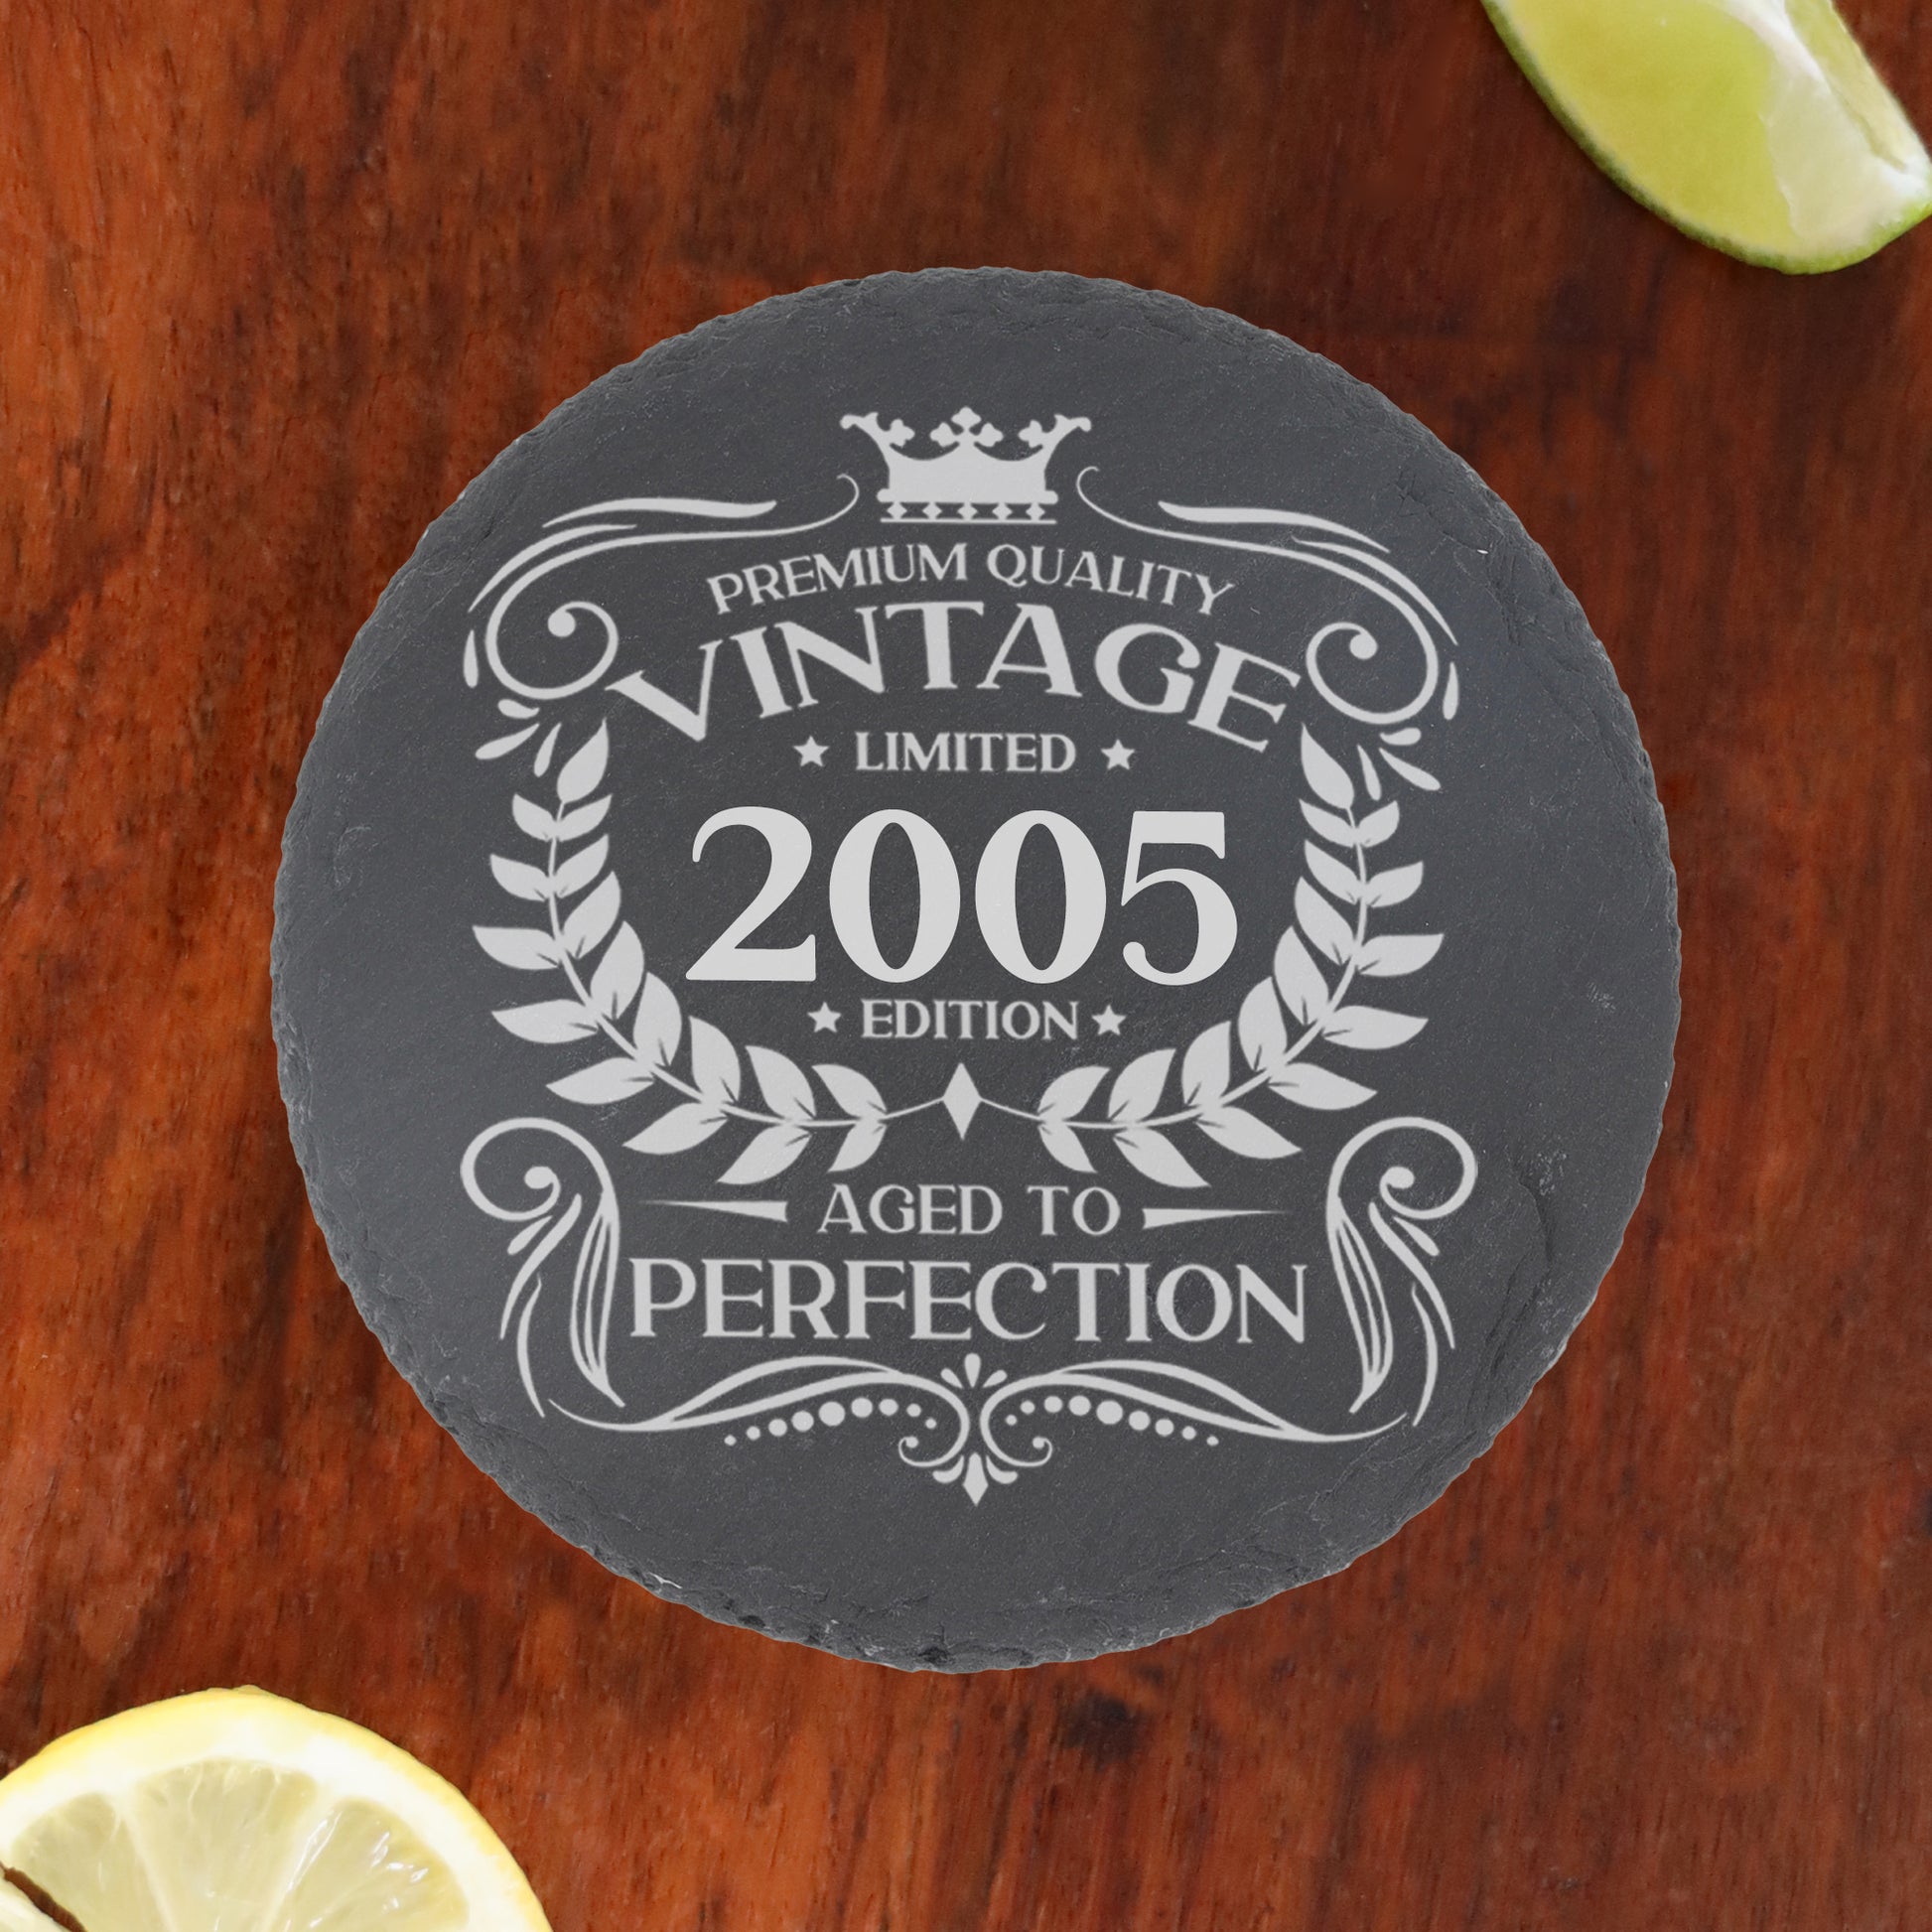 Personalised Vintage 2005 Mug and/or Coaster  - Always Looking Good - Round Coaster On Its Own  